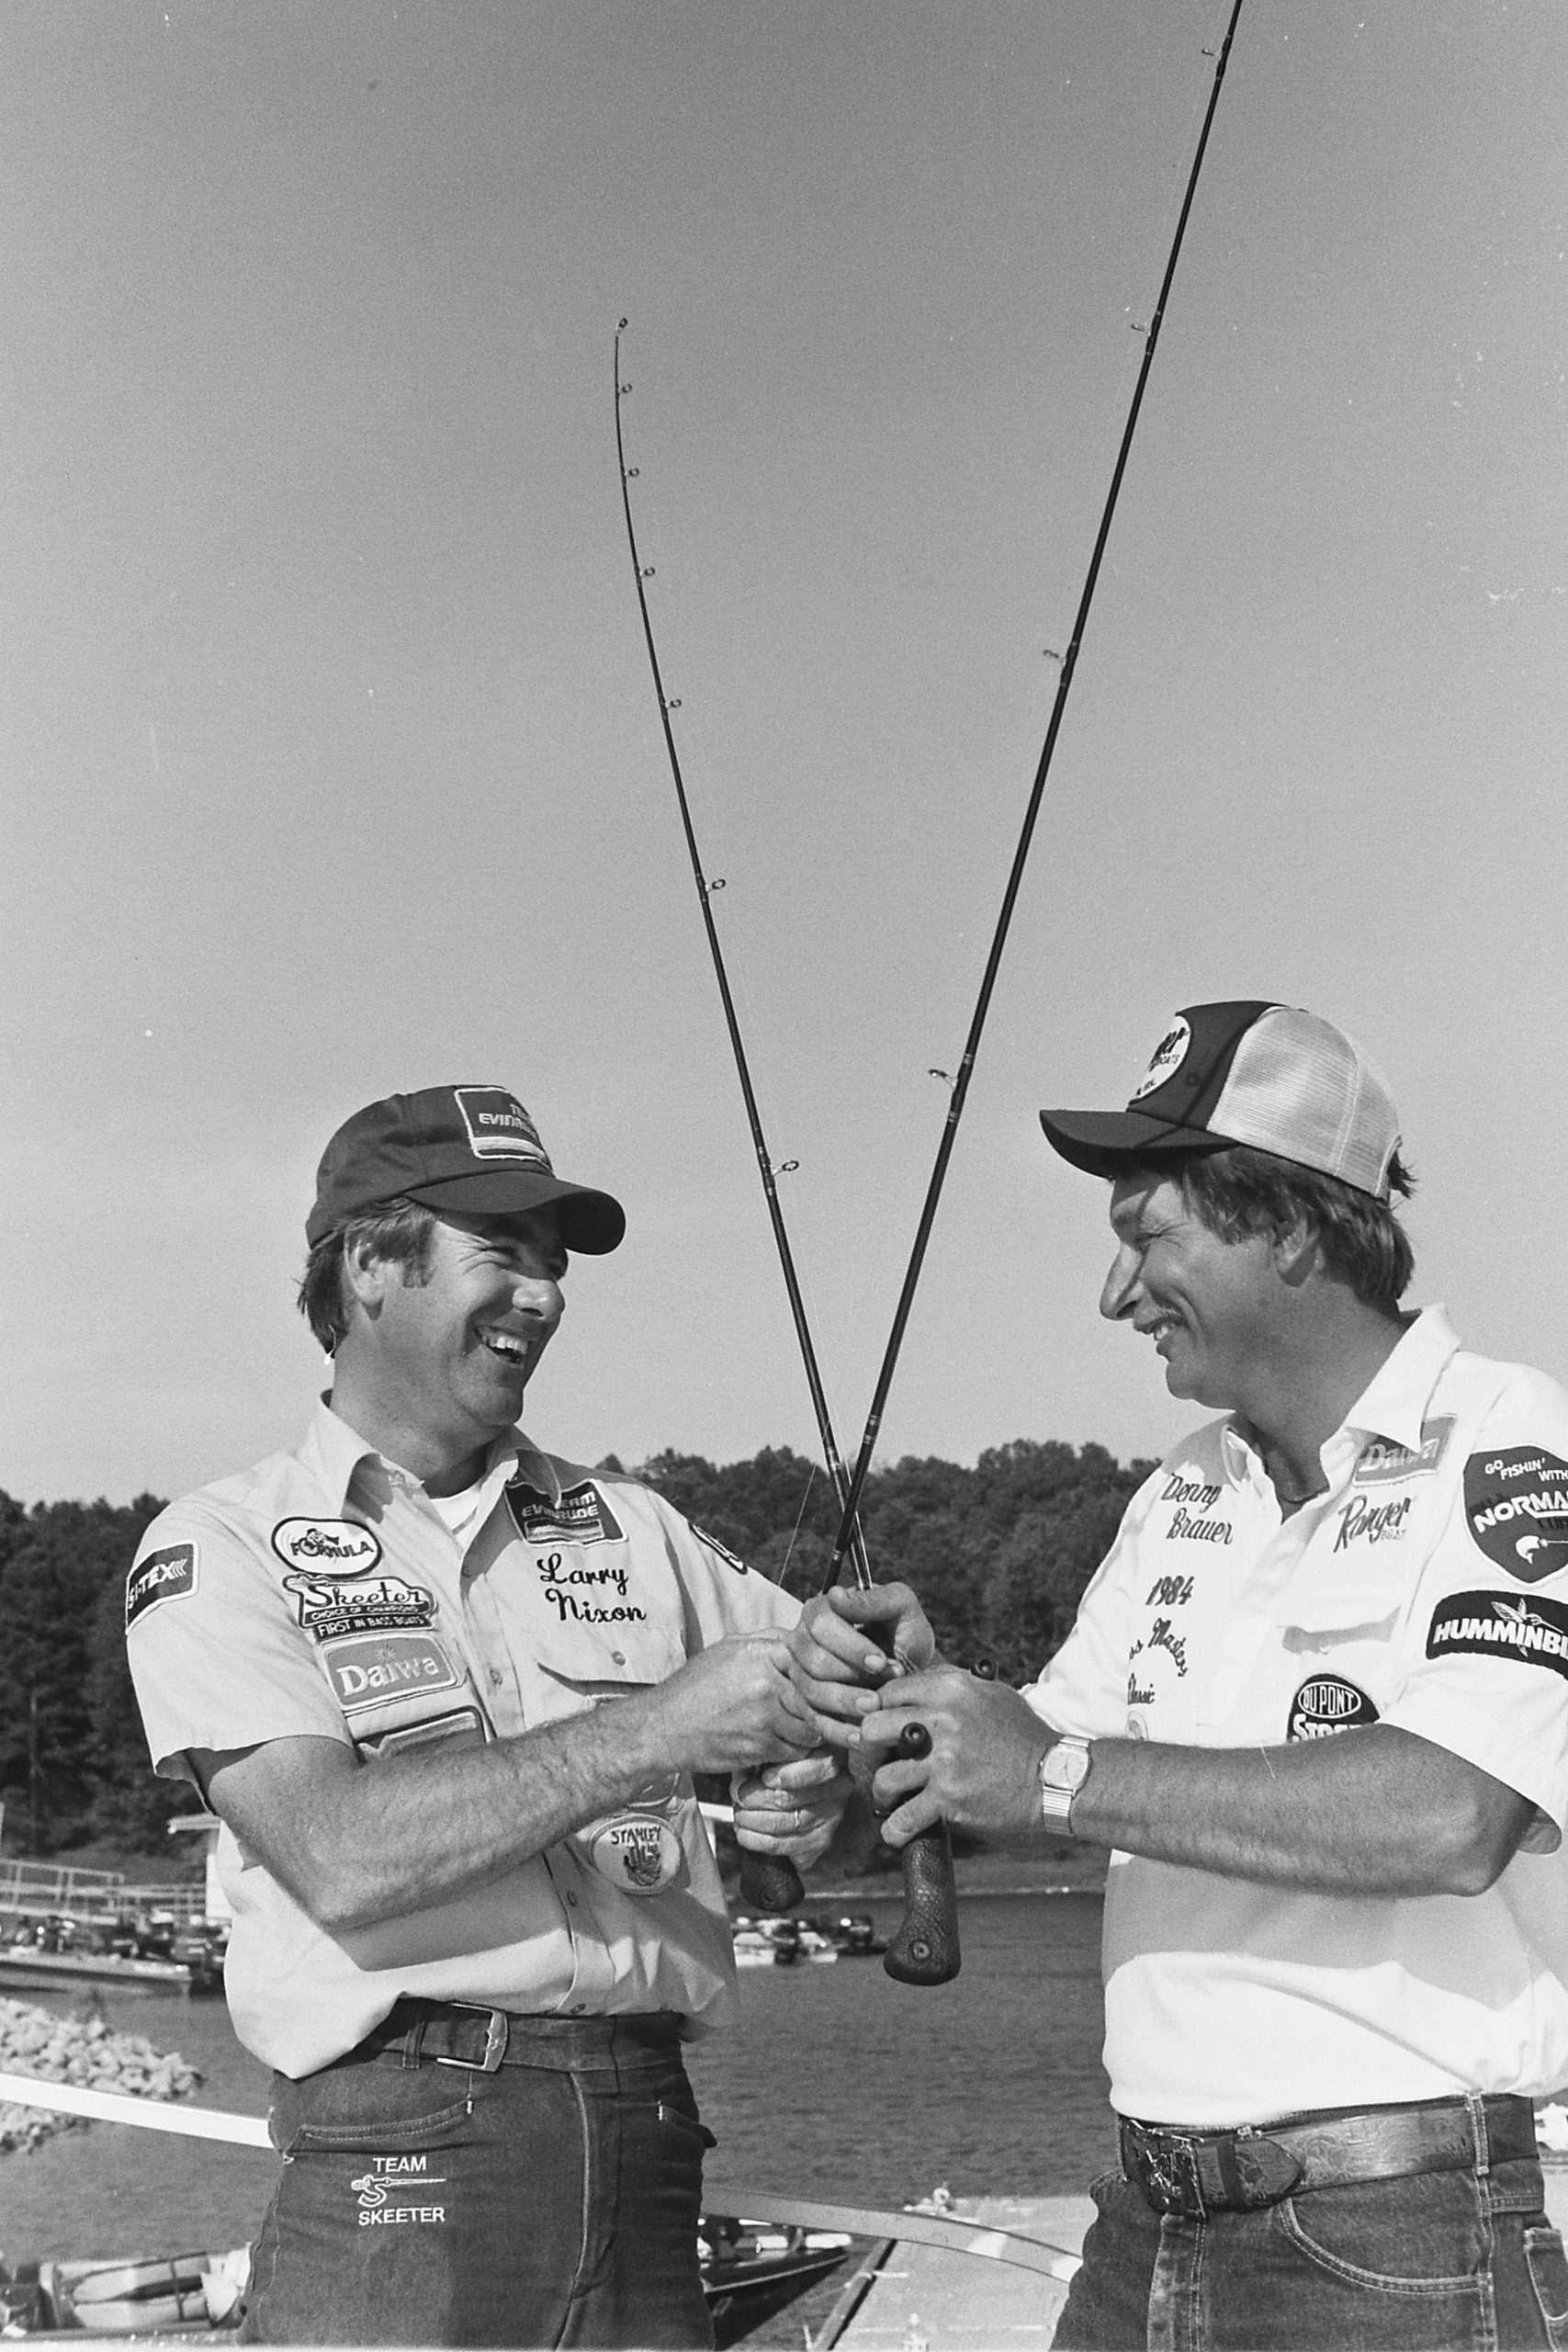 Larry Nixon and Denny Brauer posed for this âfightingâ shot, indicating the two were always neck-and-neck with each other. Nixon finished fourth in this tournament with 29-6.